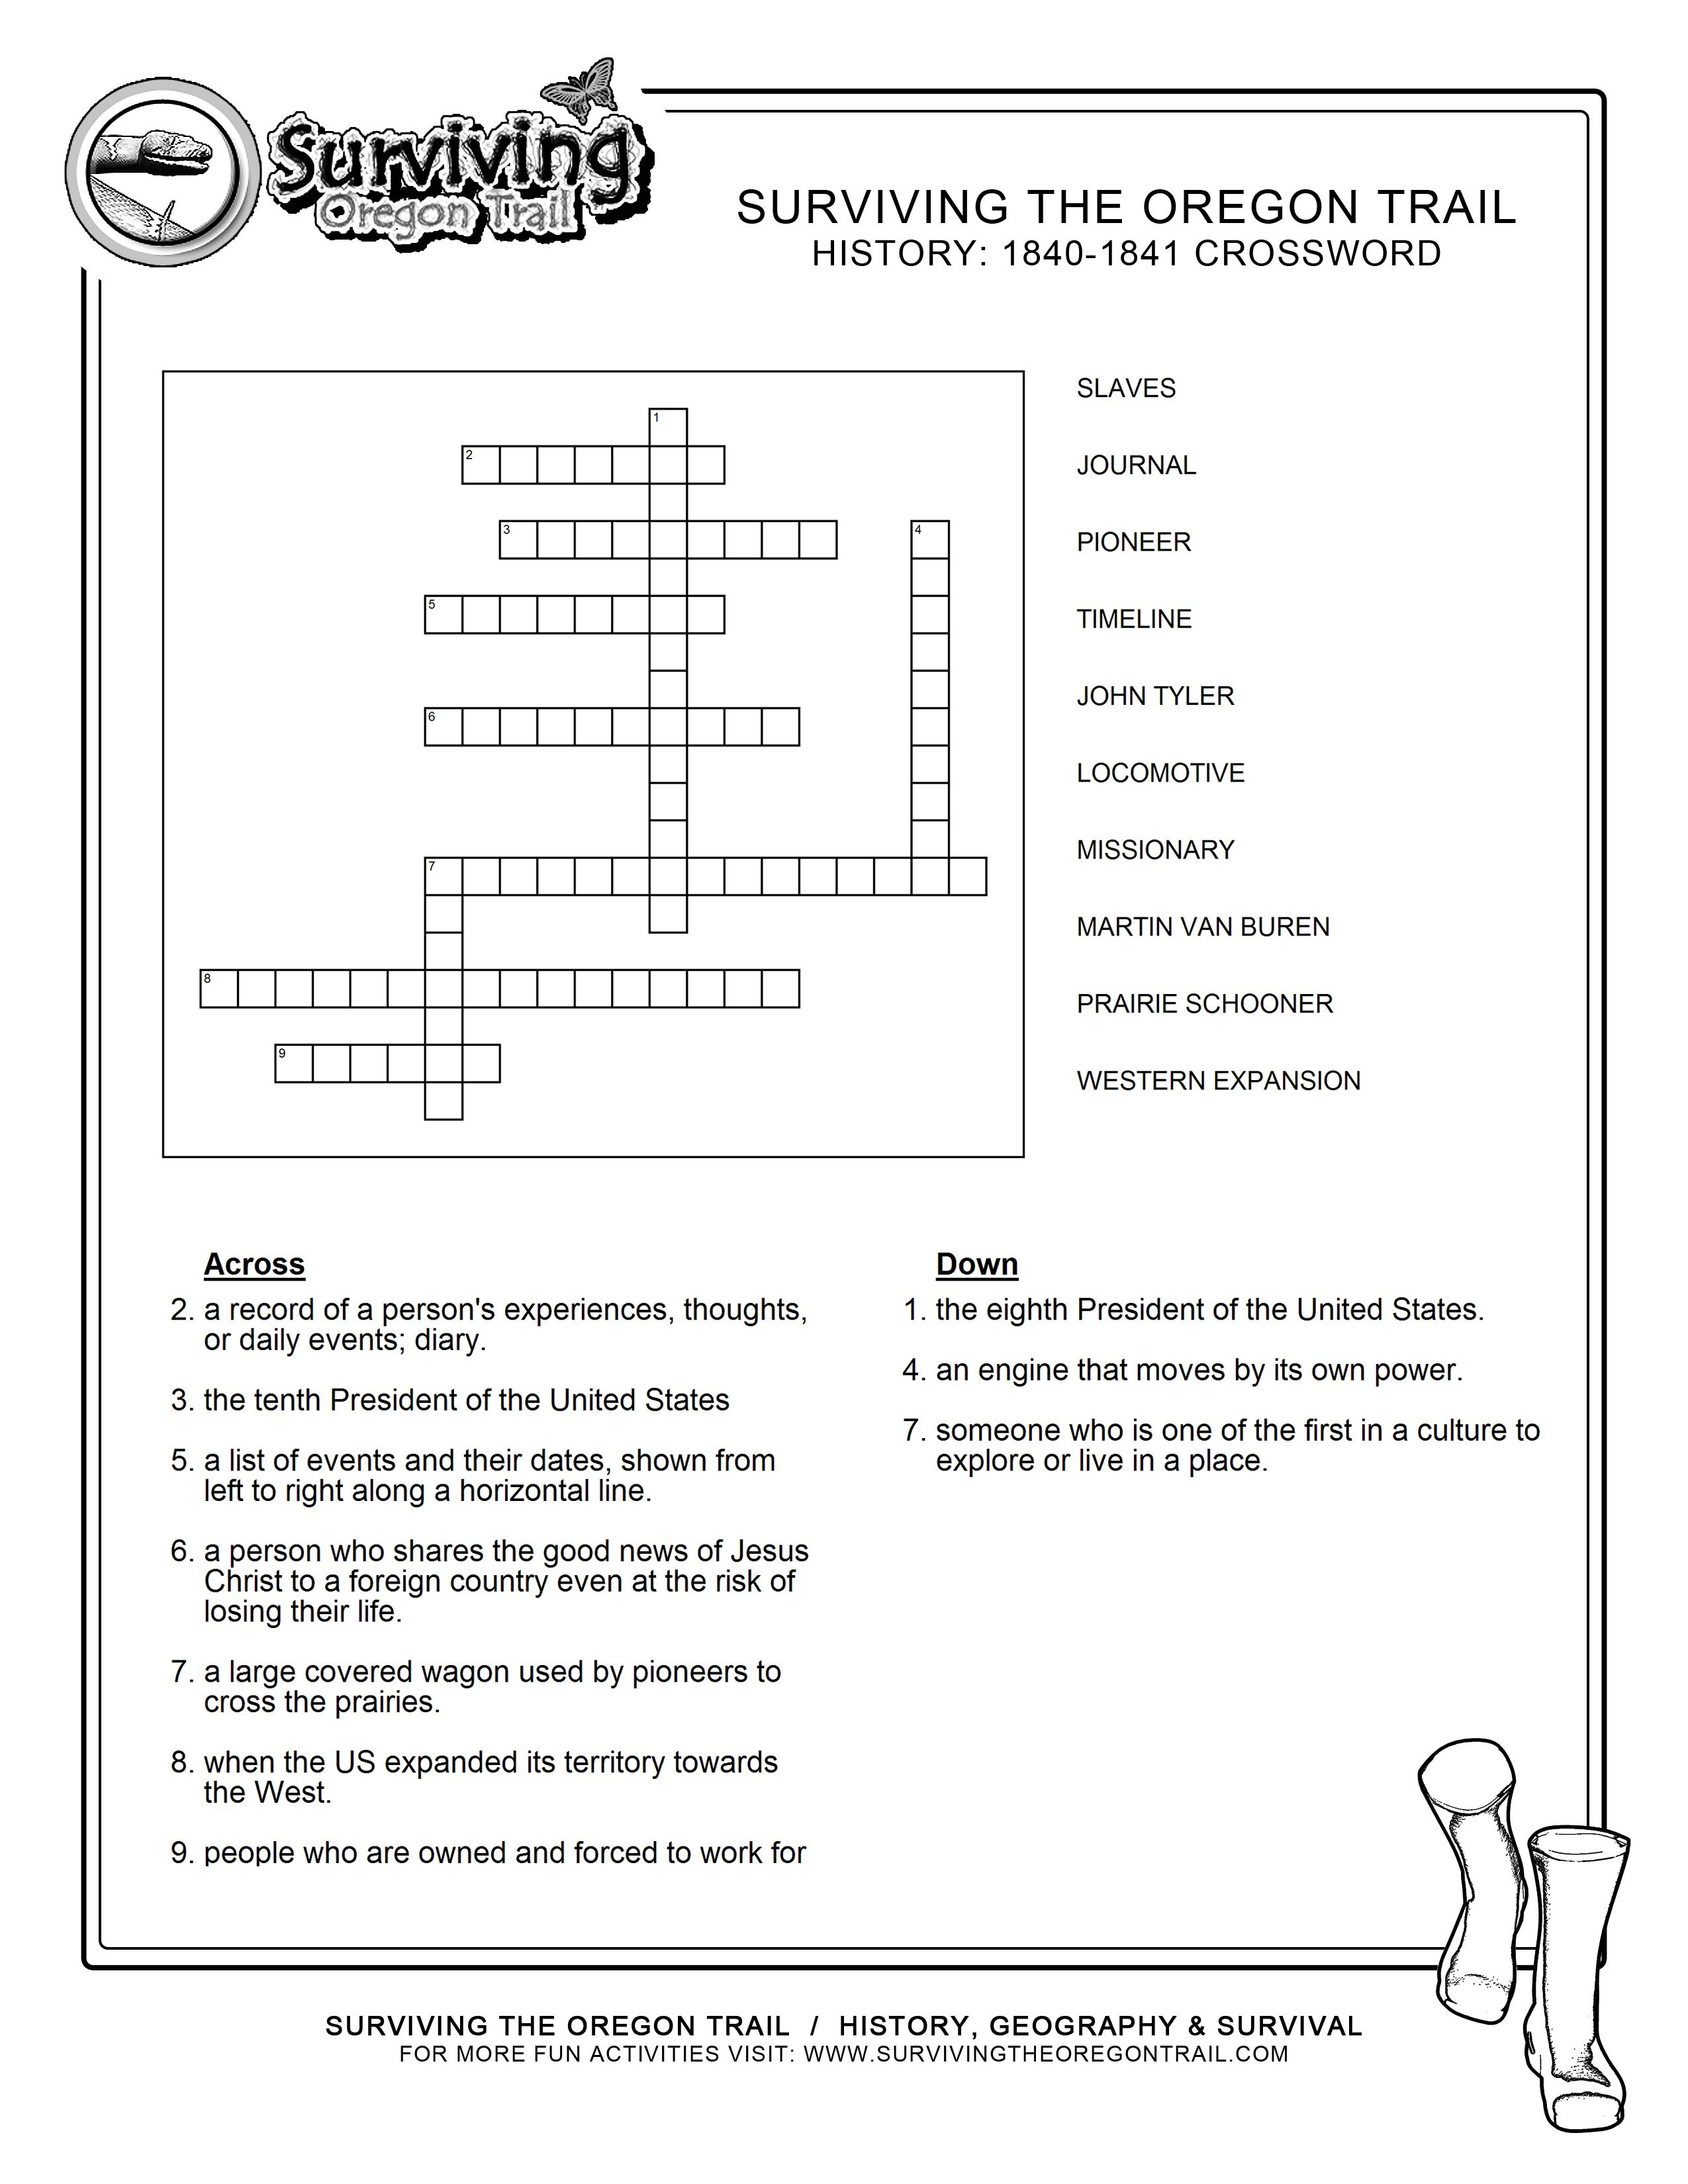 Crossword Puzzles Printable - Yahoo Image Search Results | Crossword - Printable Daily Record Crossword